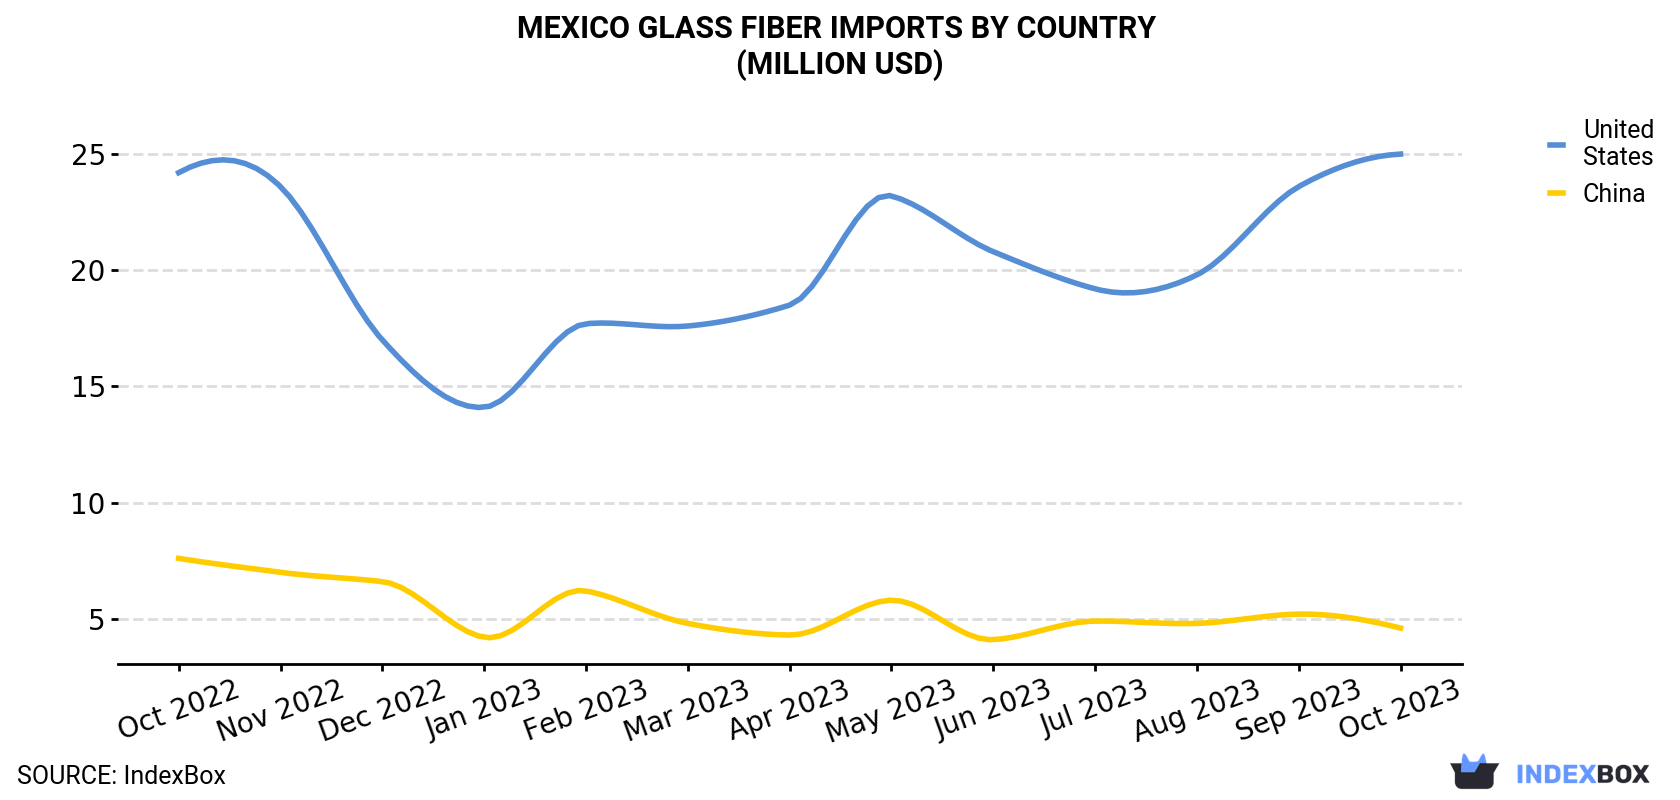 Mexico Glass Fiber Imports By Country (Million USD)